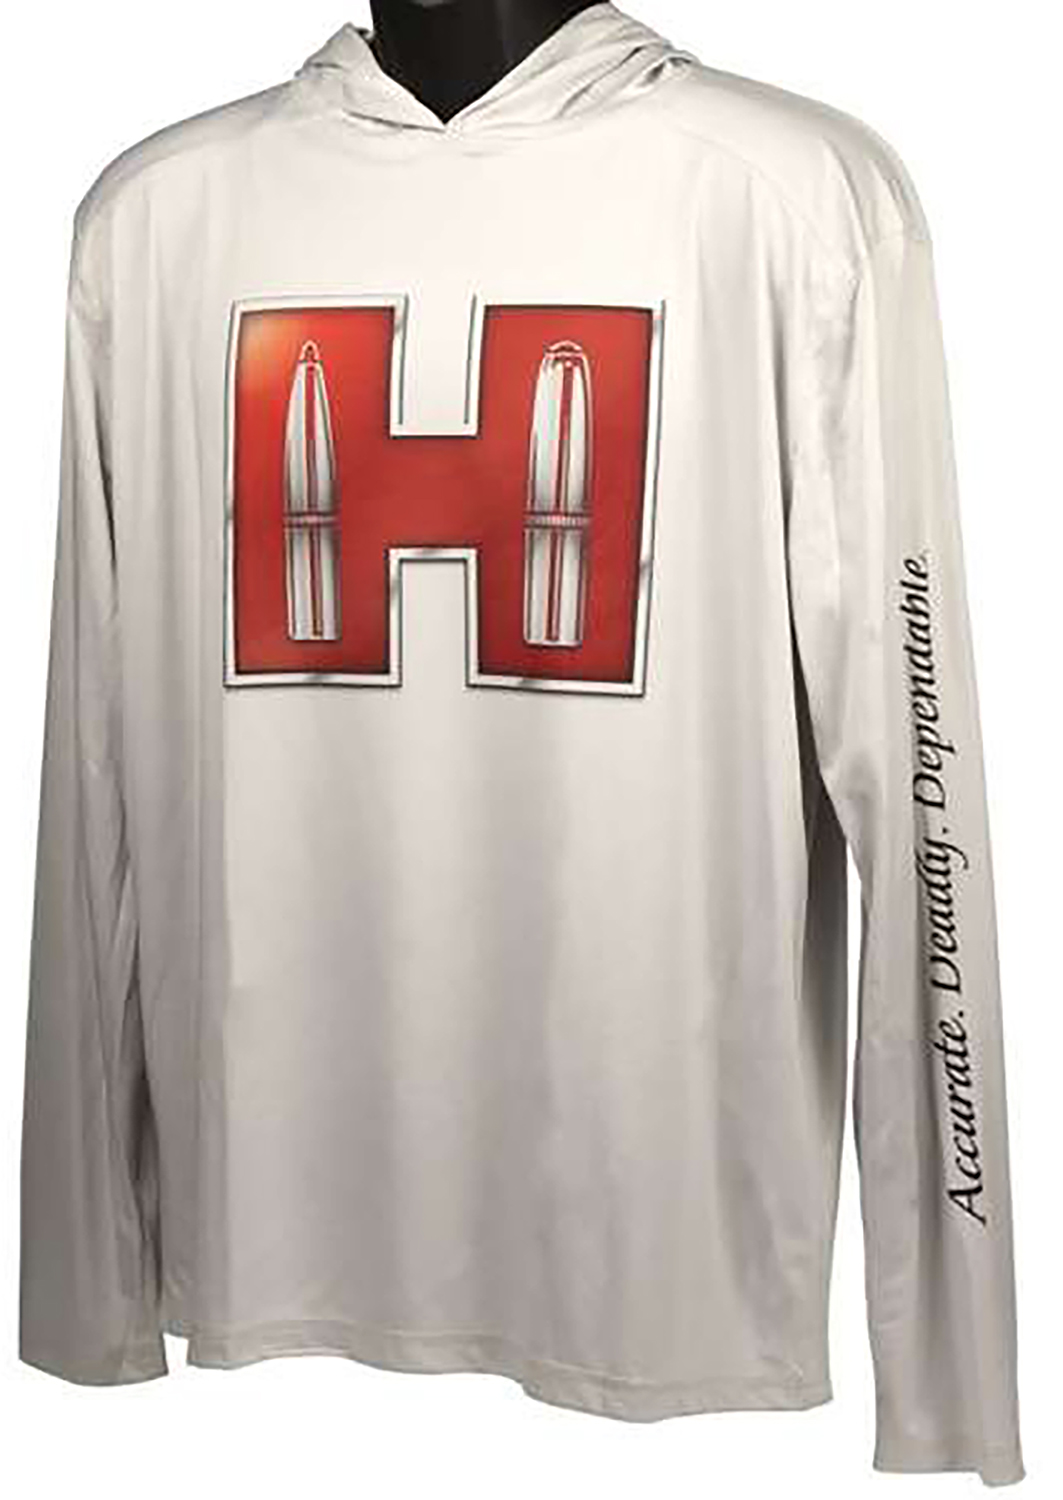 Hornady 99692L Solar Hoodie  White w/Red Logo Long Sleeve Large